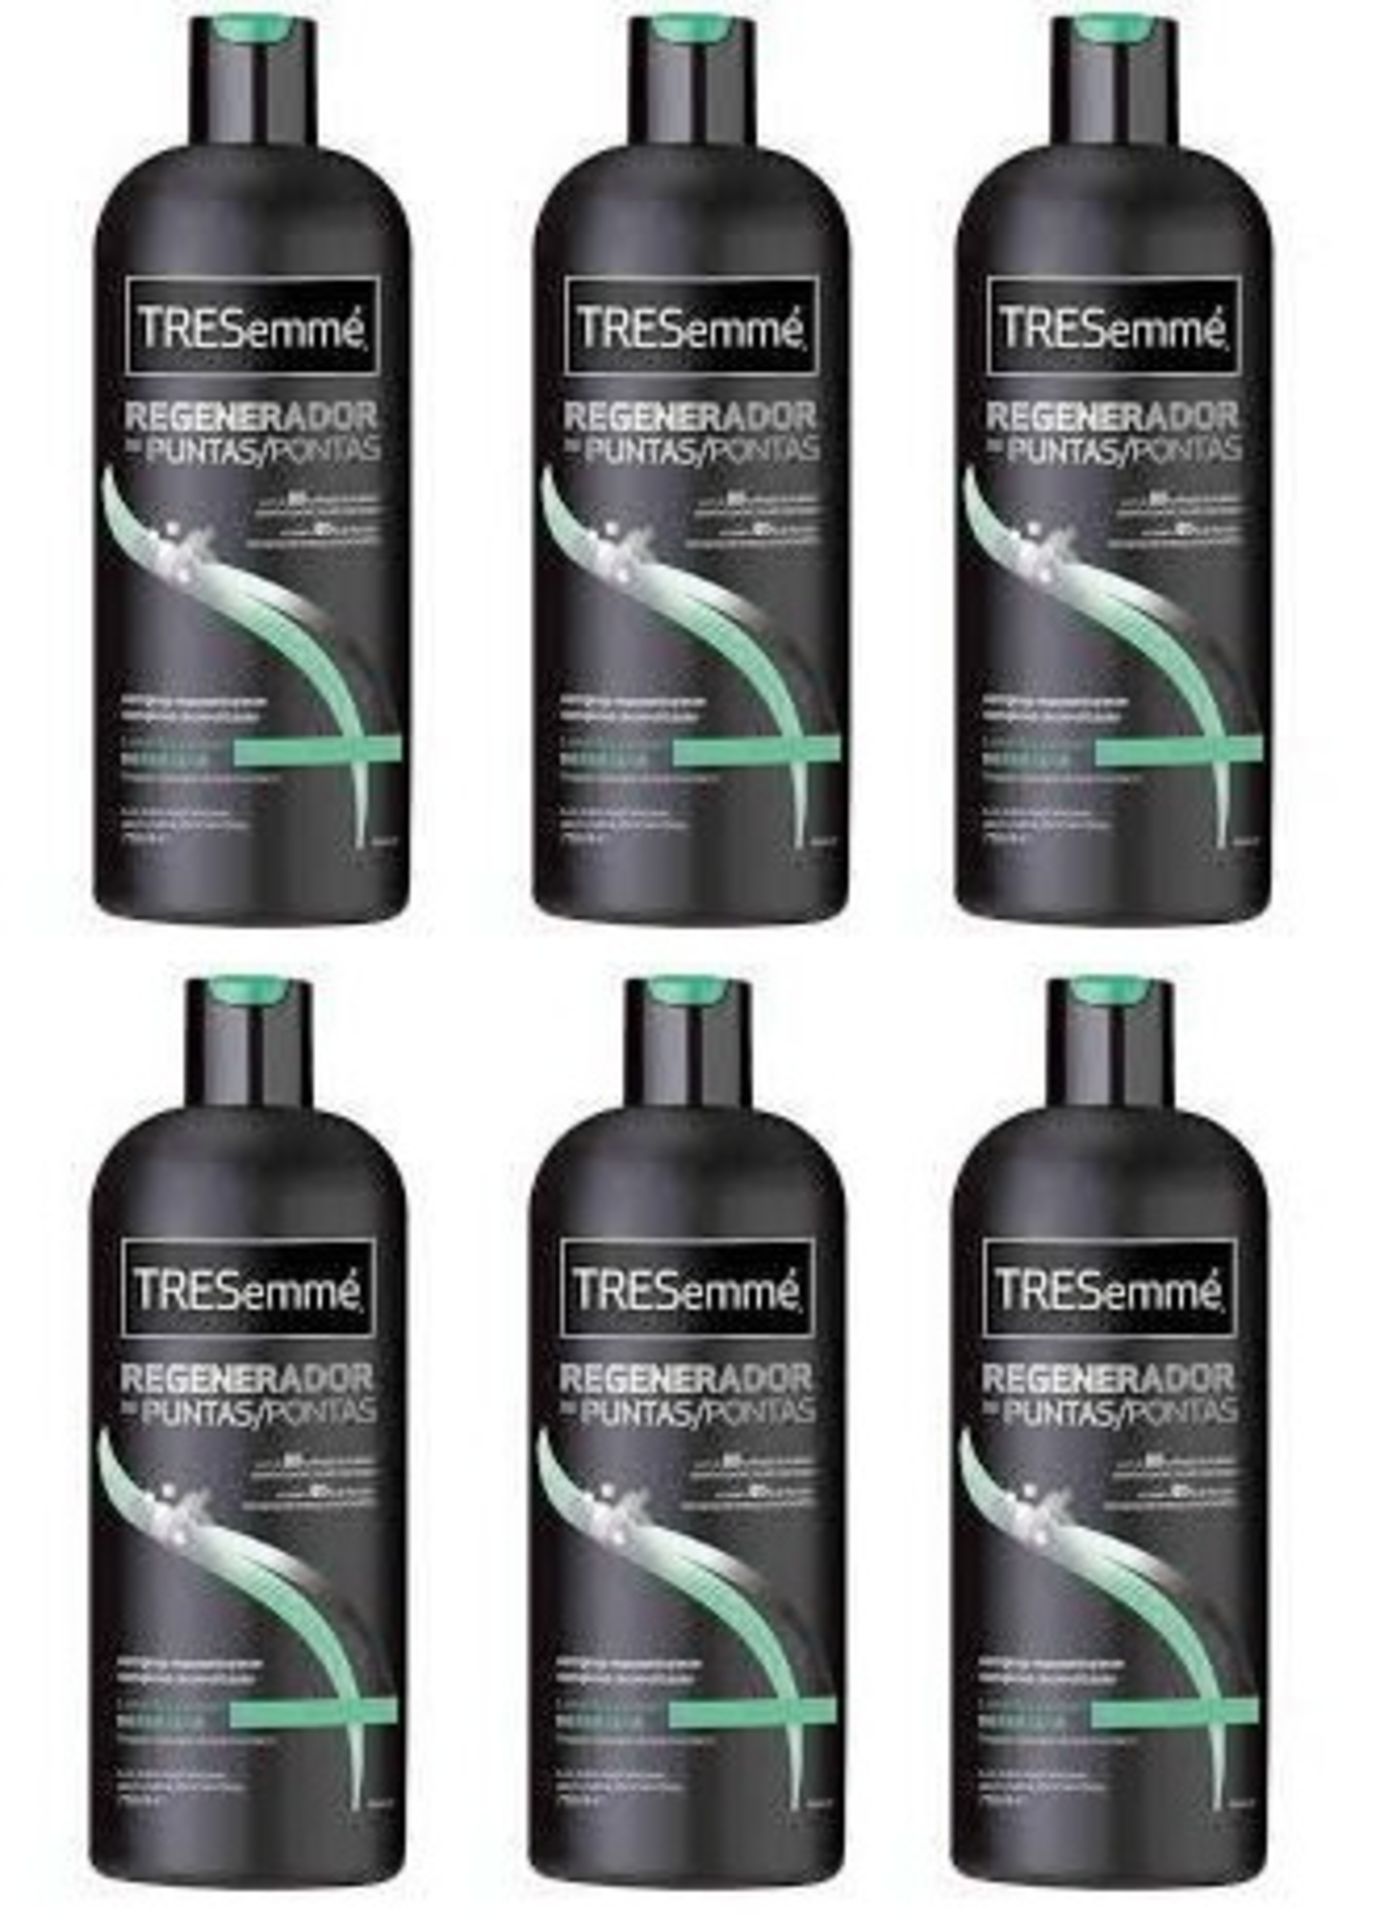 V Brand New Lot of 6 TRESemme Professional 500ml Split End Repair Shampoo (up to 80% reduction in